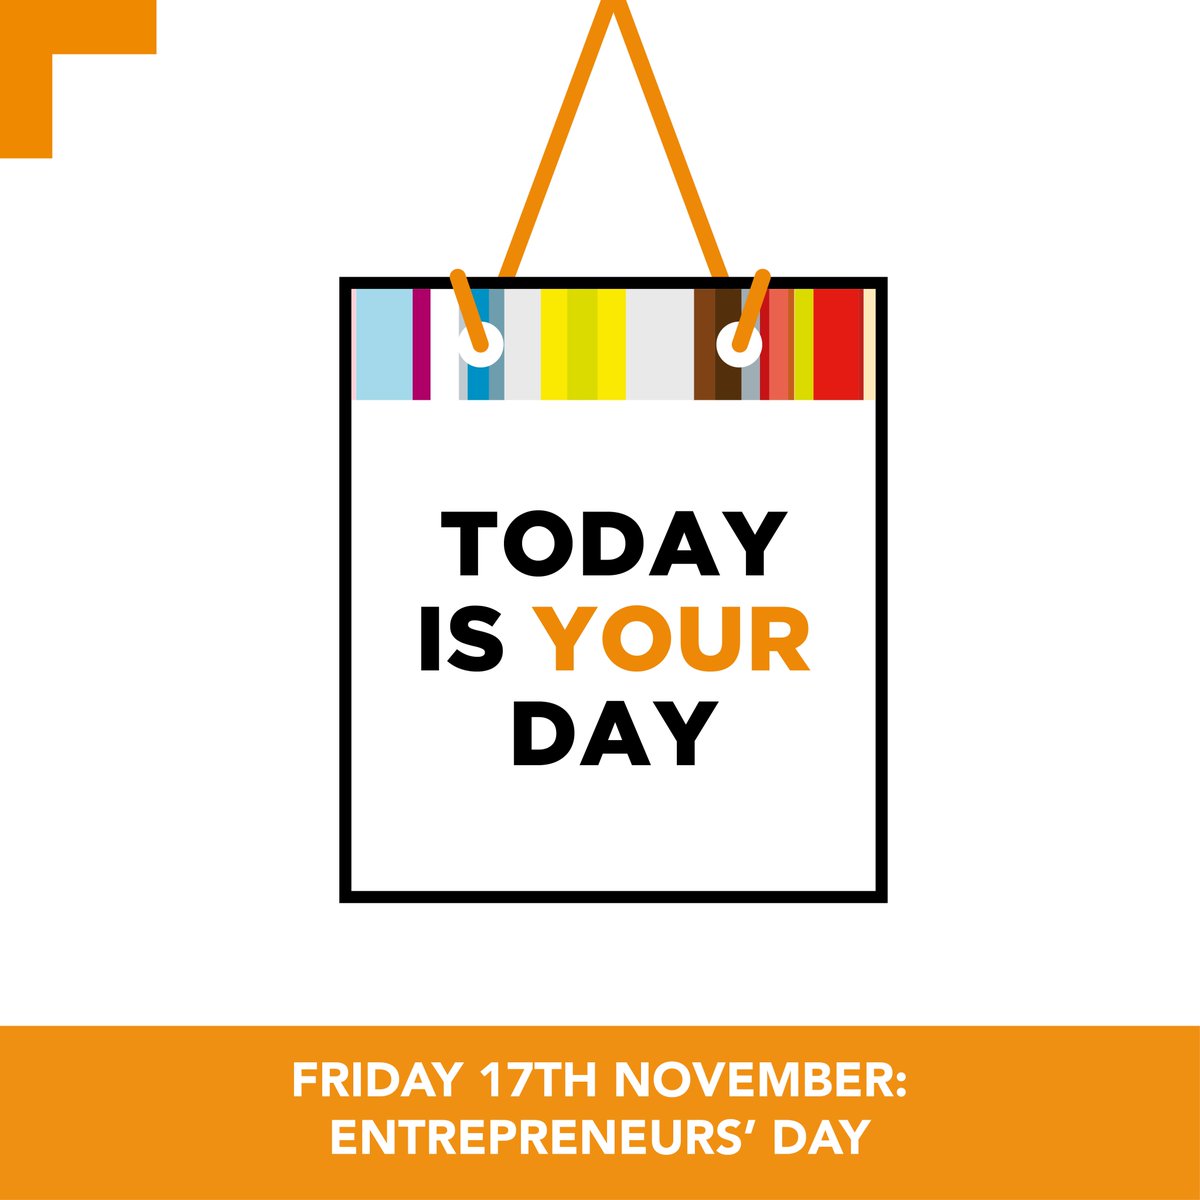 Every third Friday of November, we celebrate the #DayoftheEntrepreneur. Entrepreneurs drive innovation, create jobs, & fuel economic growth. Their vision & resilience shape the future. Here's to the dreamers & doers shaping a brighter tomorrow!💼 #Entrepreneurship #Innovation